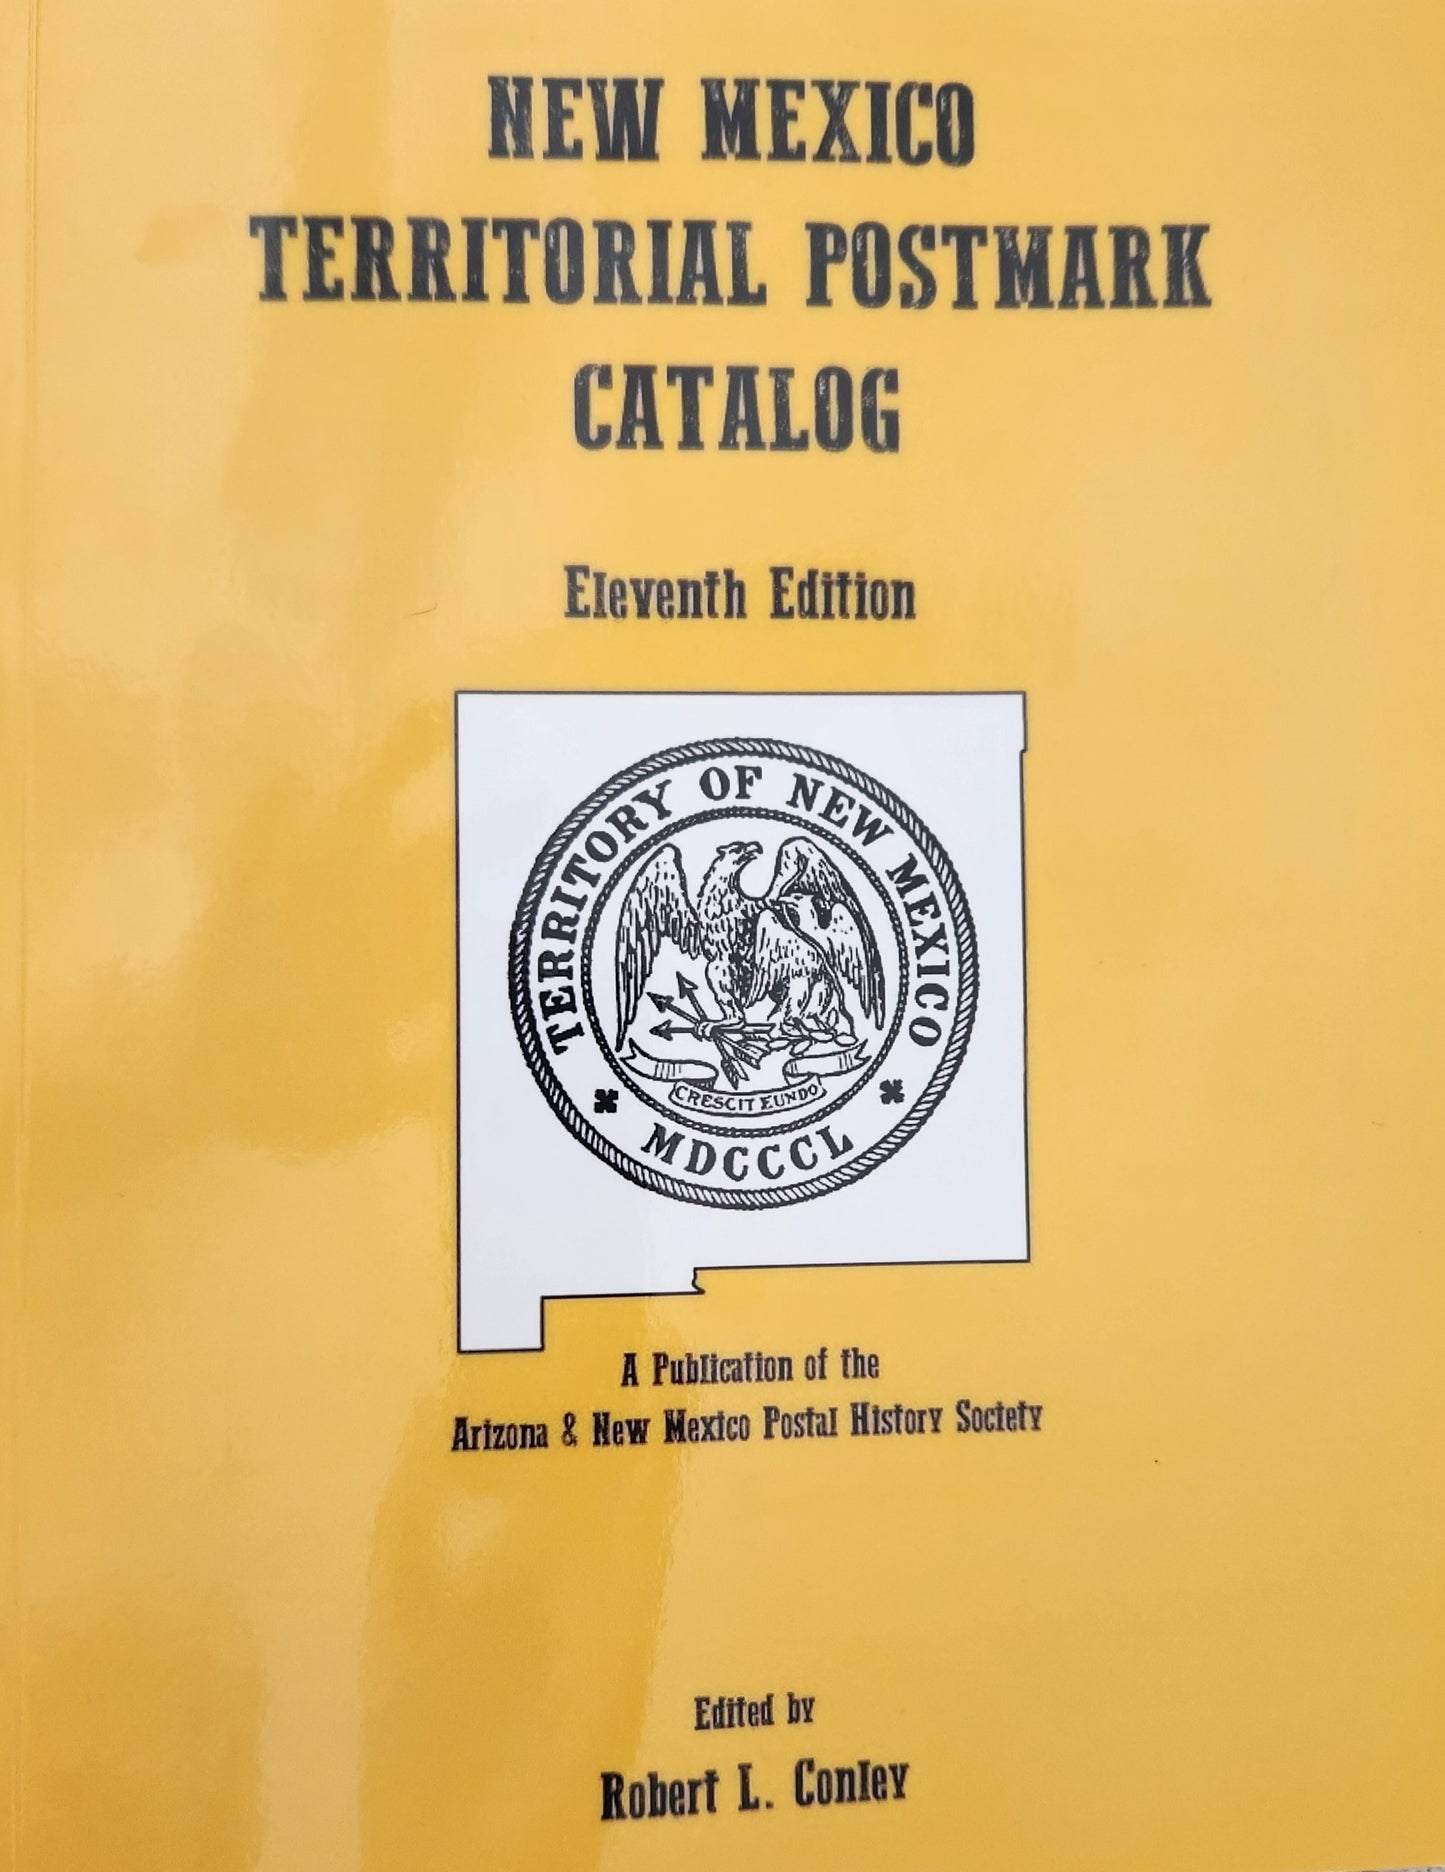 New Mexico Territorial Postmark Catalog: Eleventh Edition Edited by Robert L. Conley